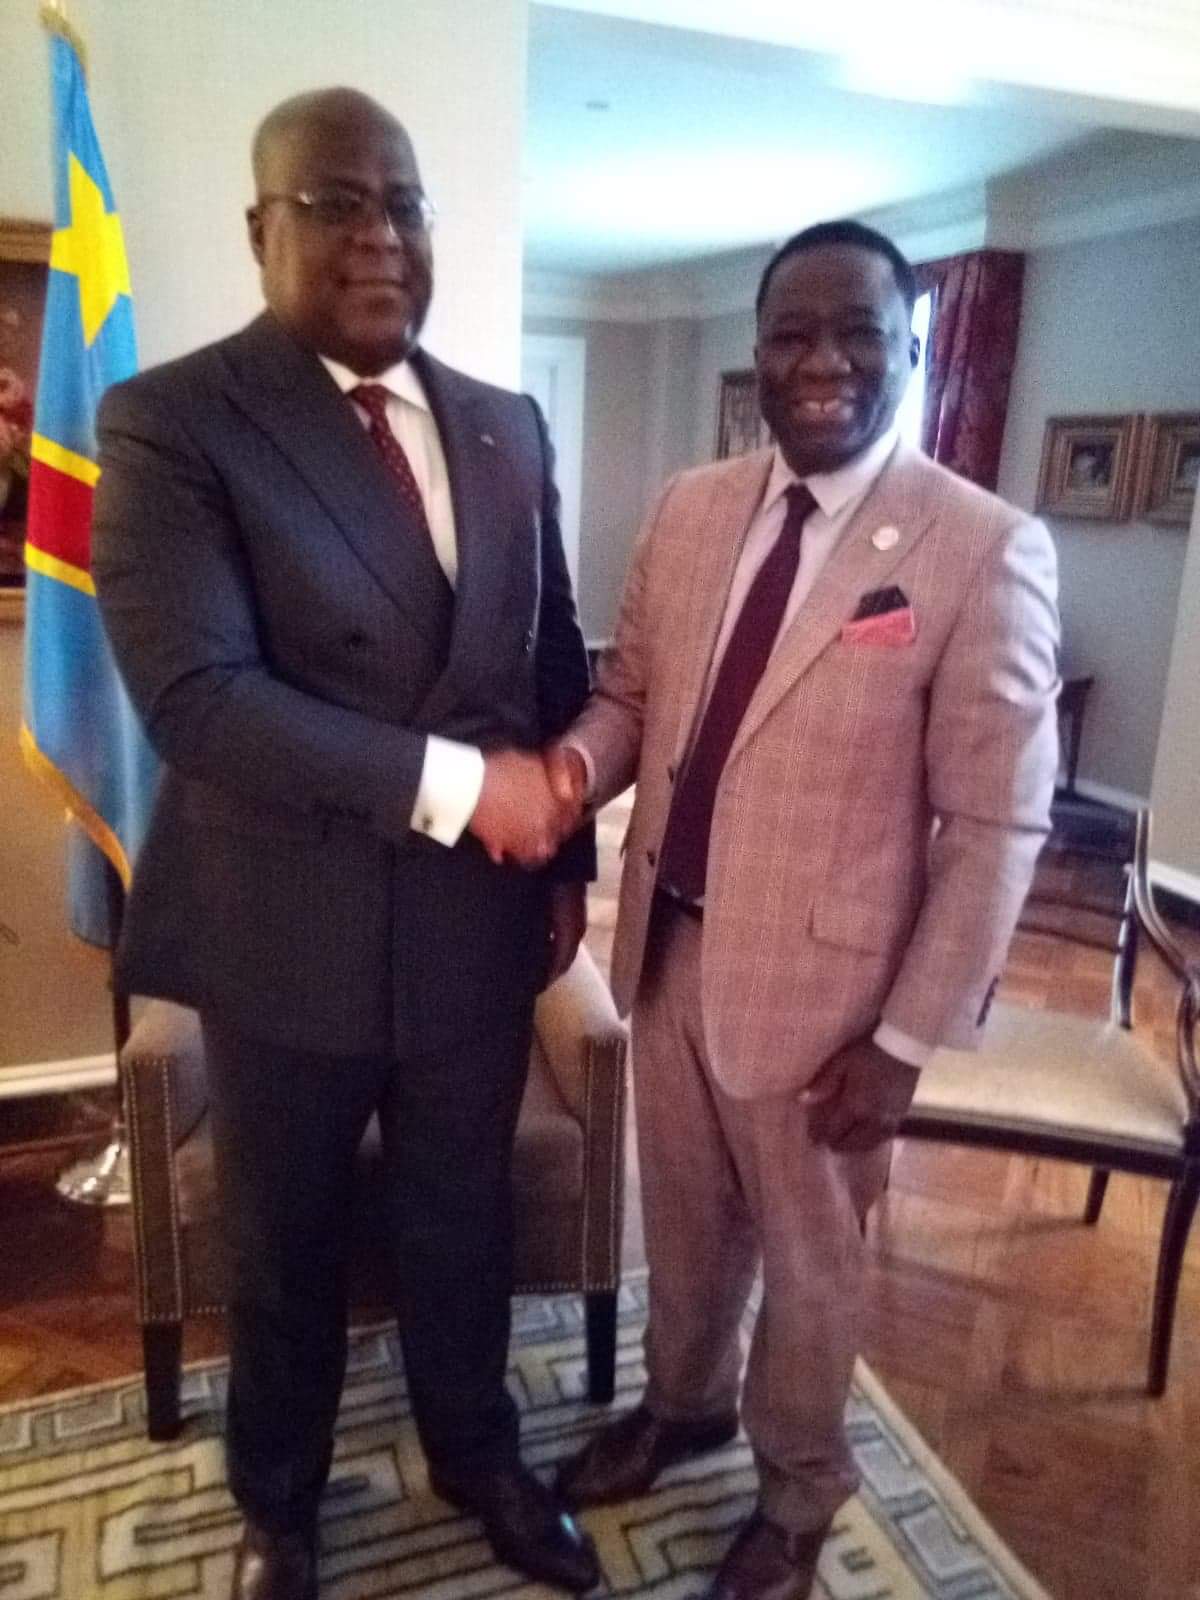 His Excellency President of DR Congo meeting IHRC Deputy Foreign Minister in the Fringes of the UNGA 2019